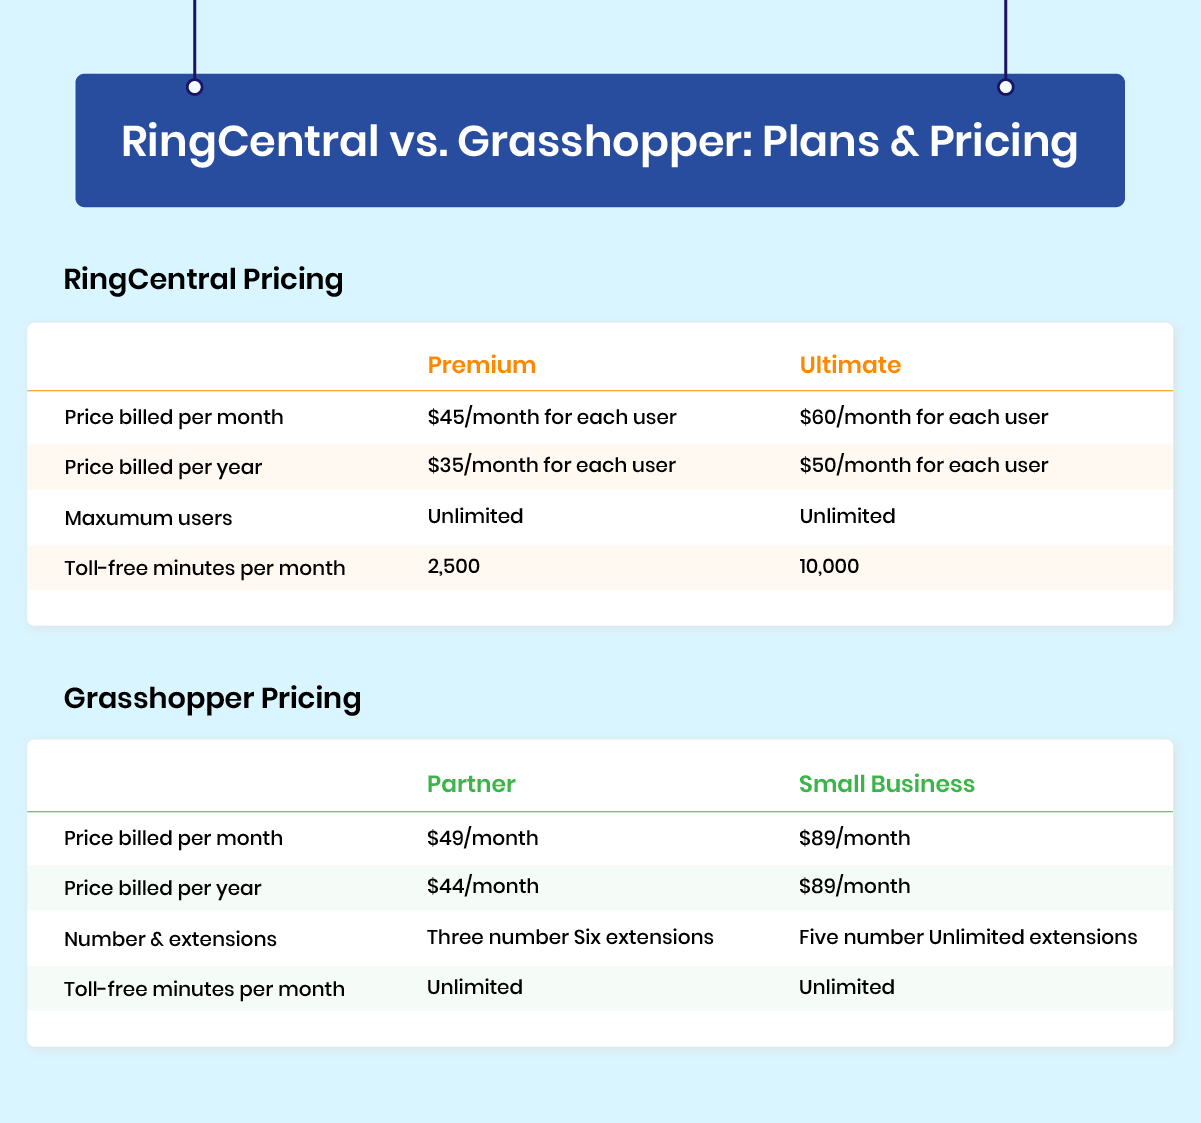 RingCentral vs. Grasshopper: Plans and Pricing